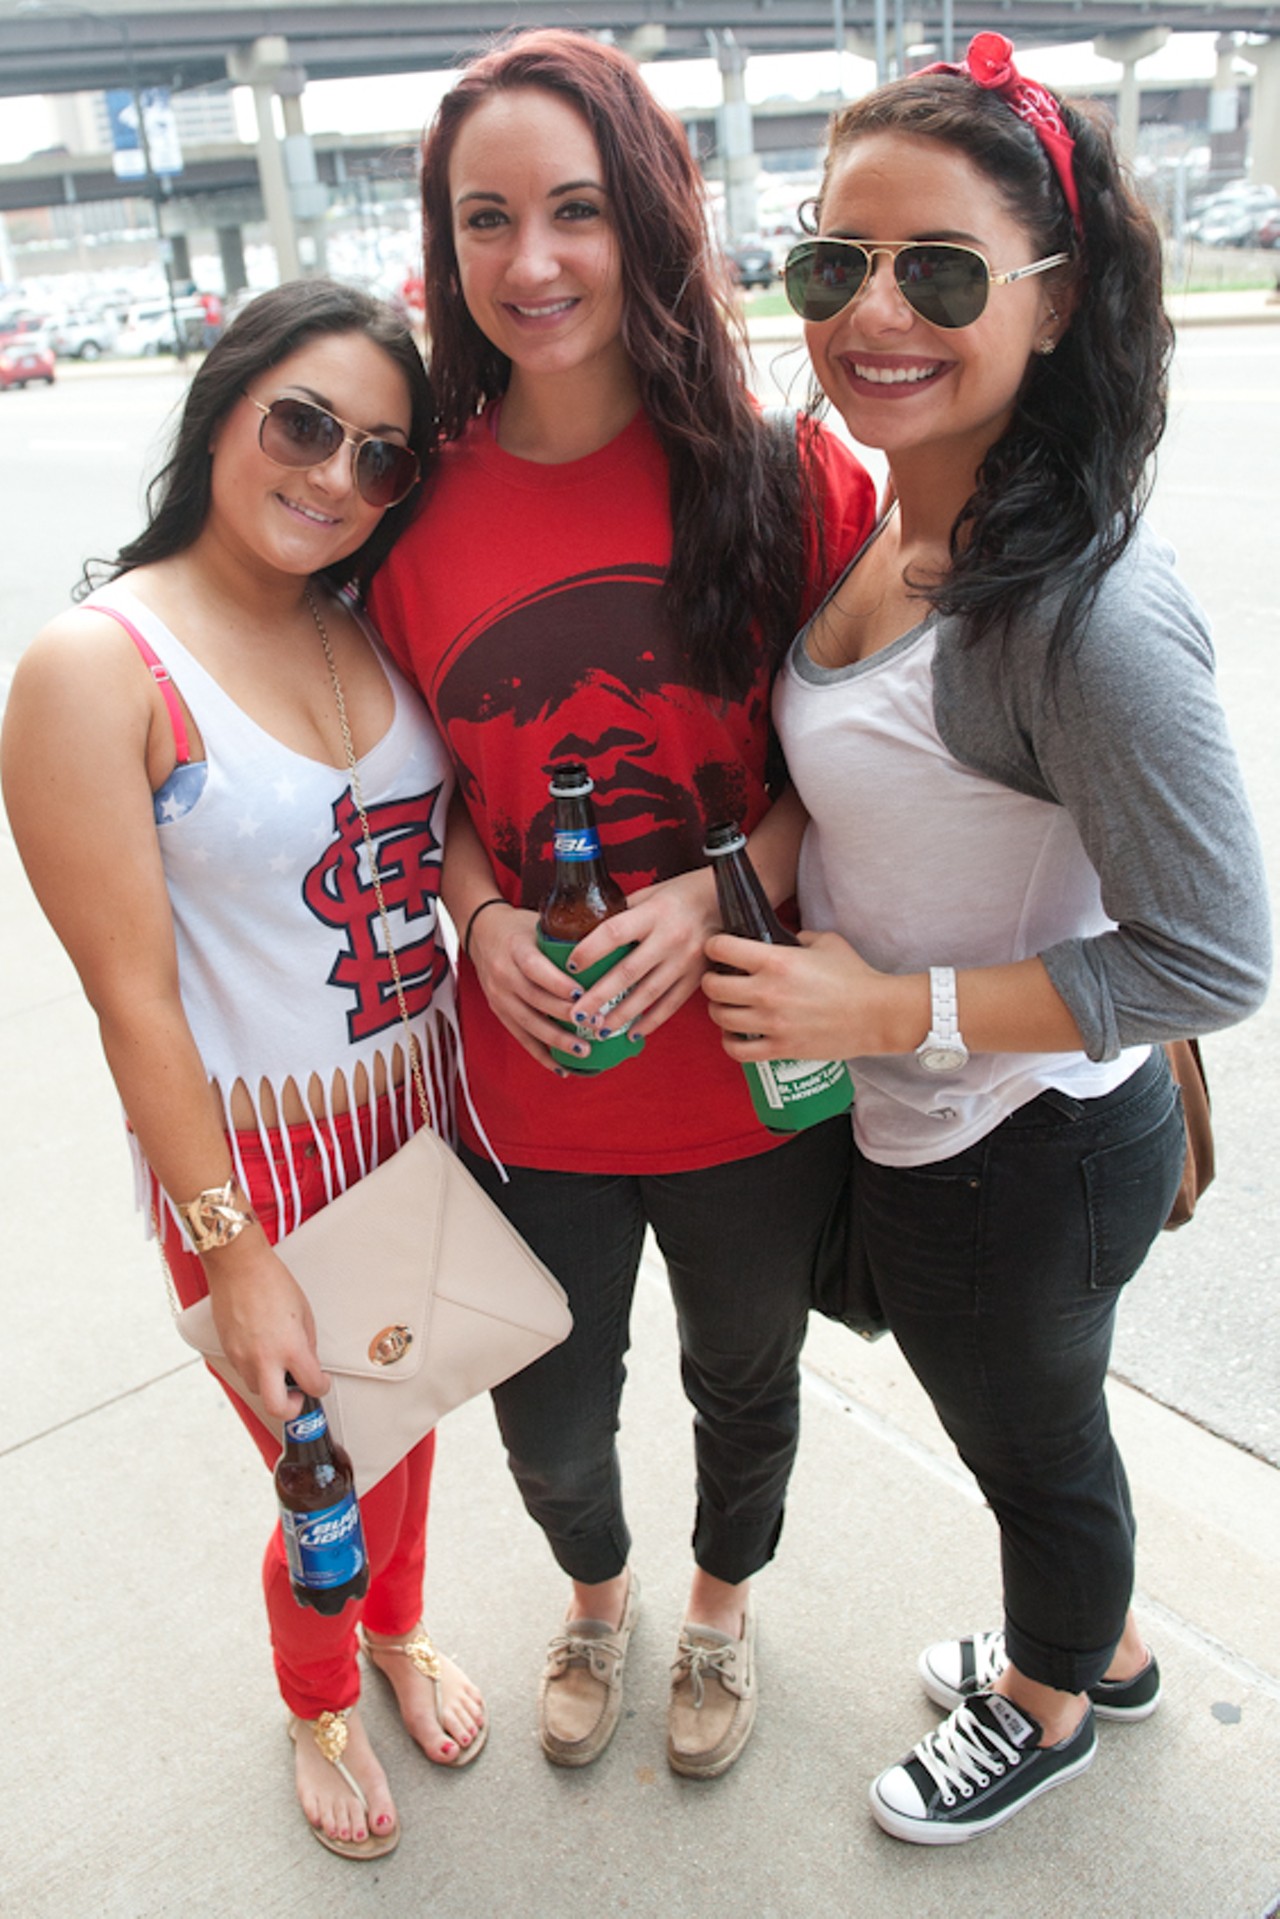 The People You Will See at Busch Stadium